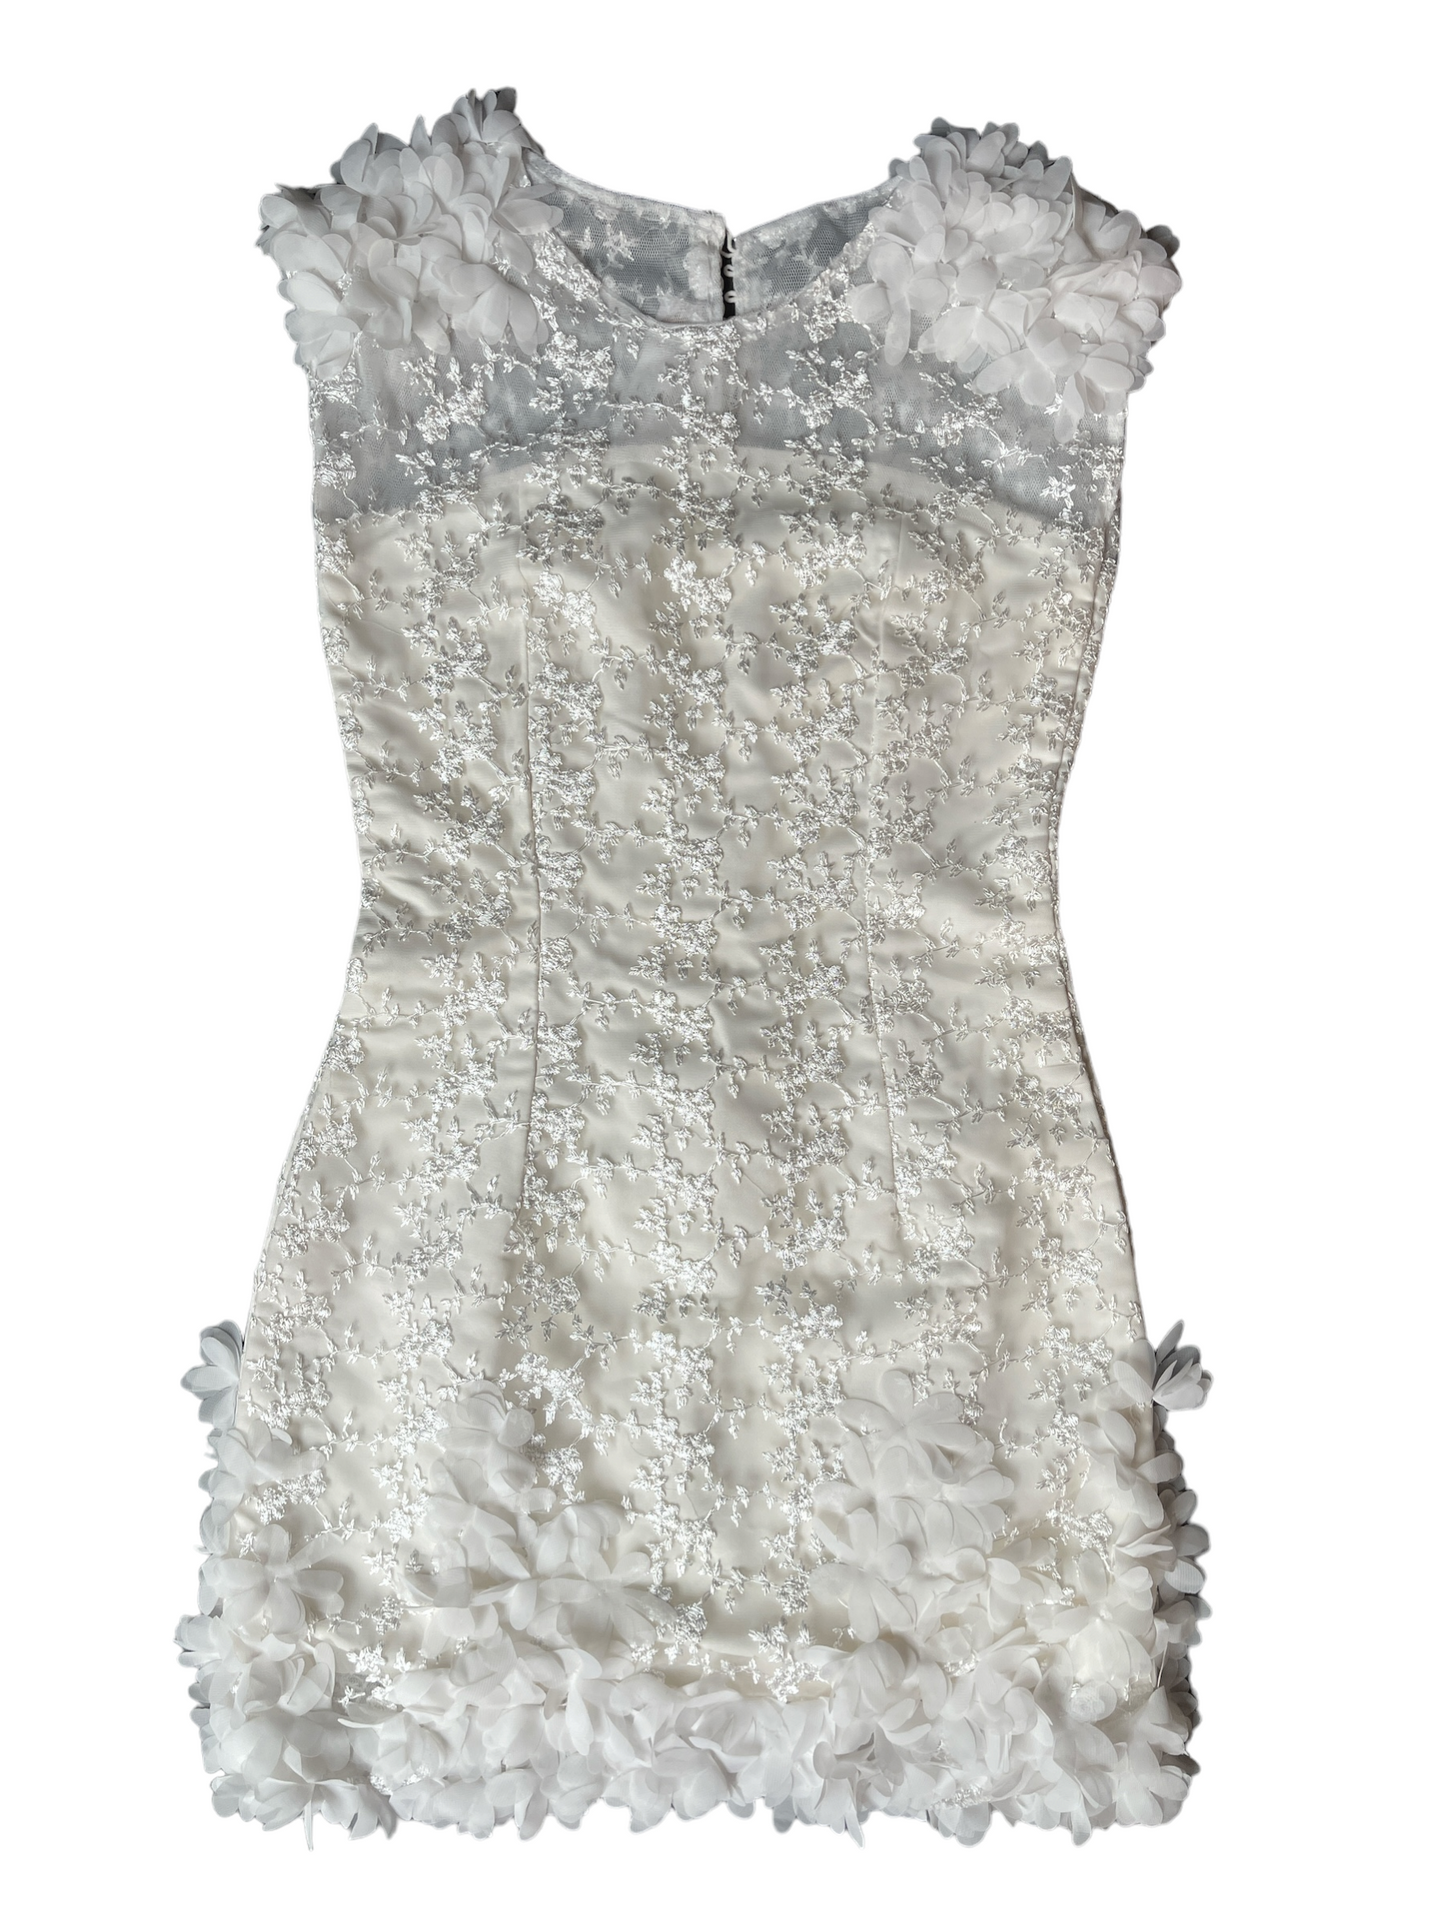 Handmade Designer White Formal Dress with Lace Detailing, Size S